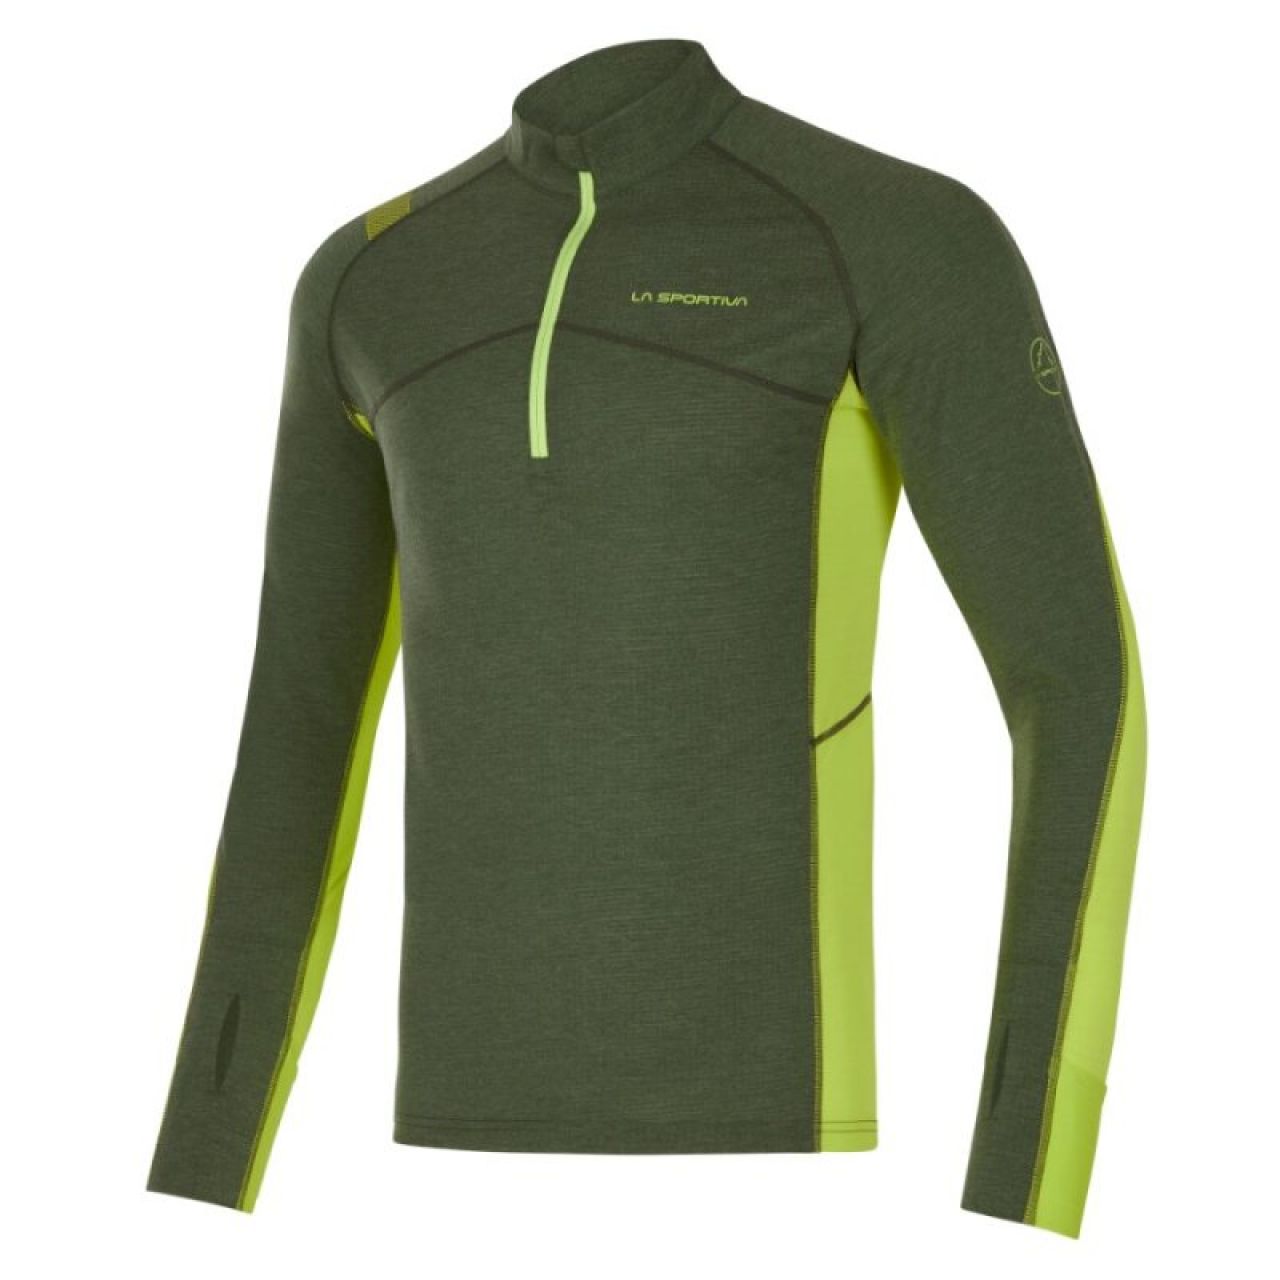 LA SPORTIVA SWIFT LONG SLEEVE M FOREST ET LIME PUNCH Seconde couche